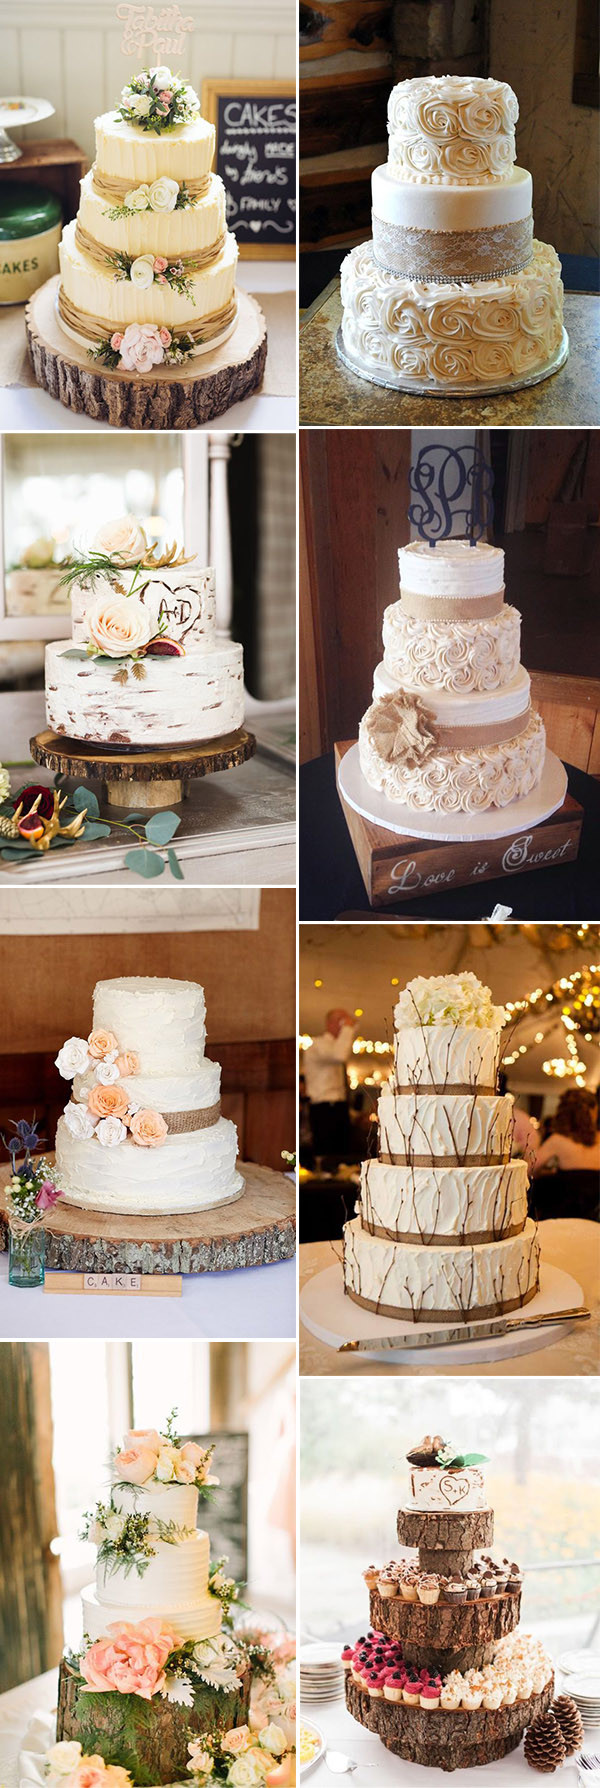 Country Wedding Cakes Ideas
 50 Steal Worthy Wedding Cake Ideas For Your Special Day